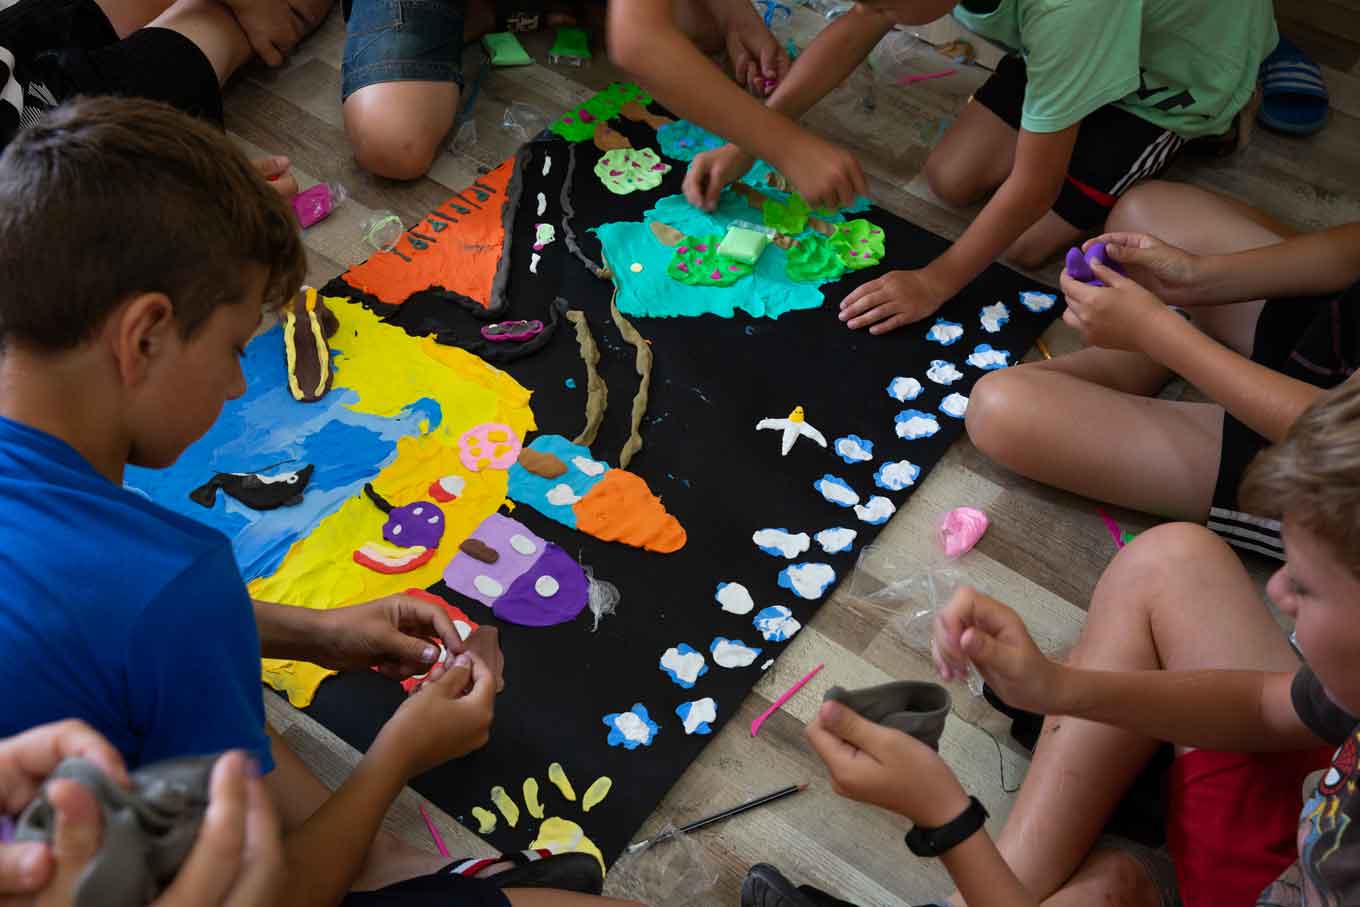 Children work on a craft project with clay and paint